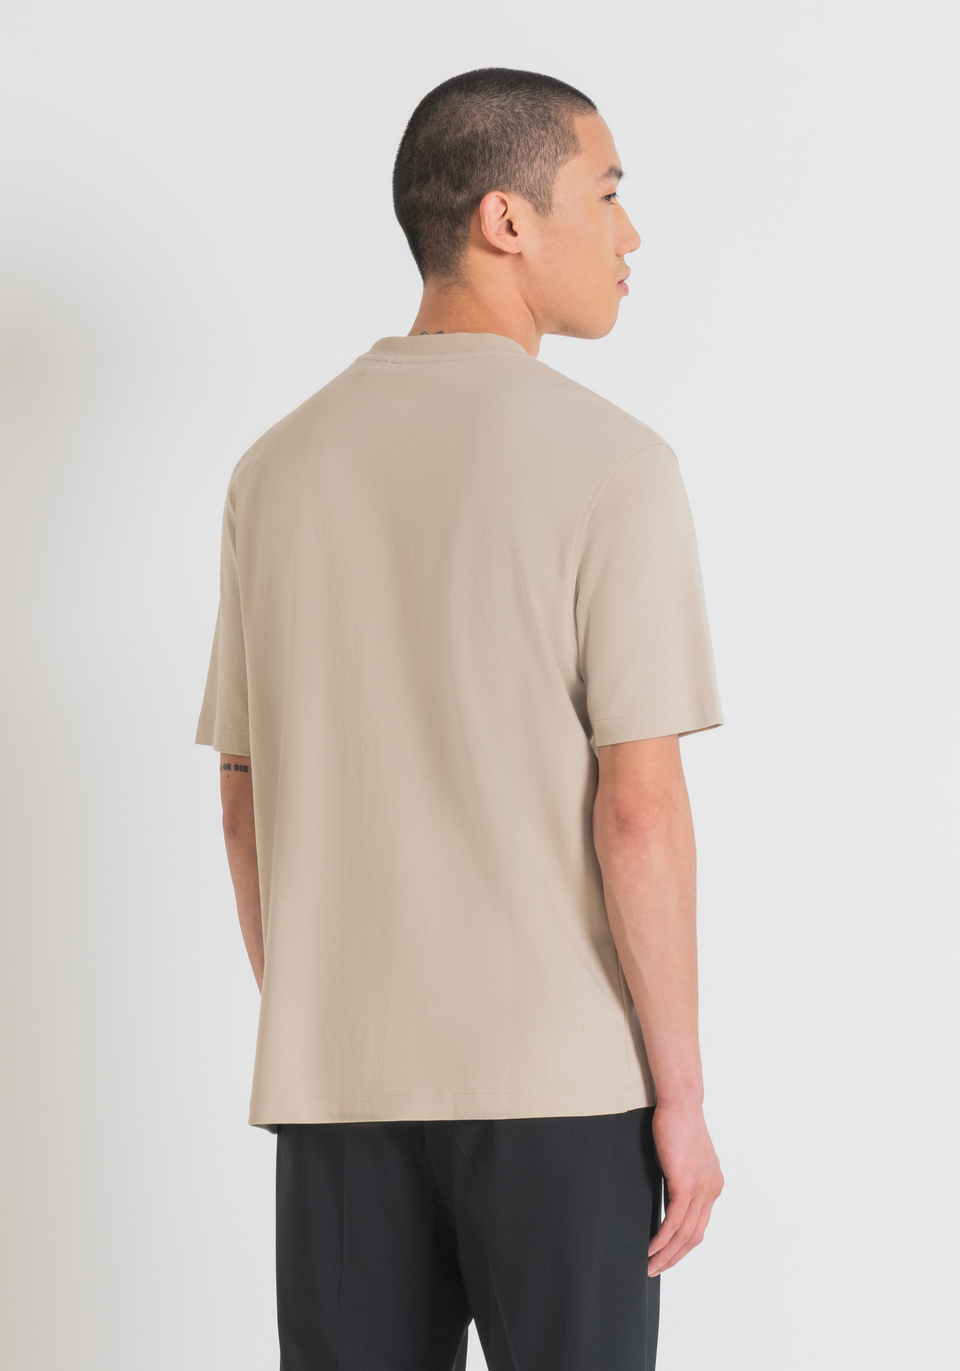 RELAXED FIT T-SHIRT IN COTTON JERSEY WITH EMBOSSED LOGO PRINT - Antony Morato Online Shop